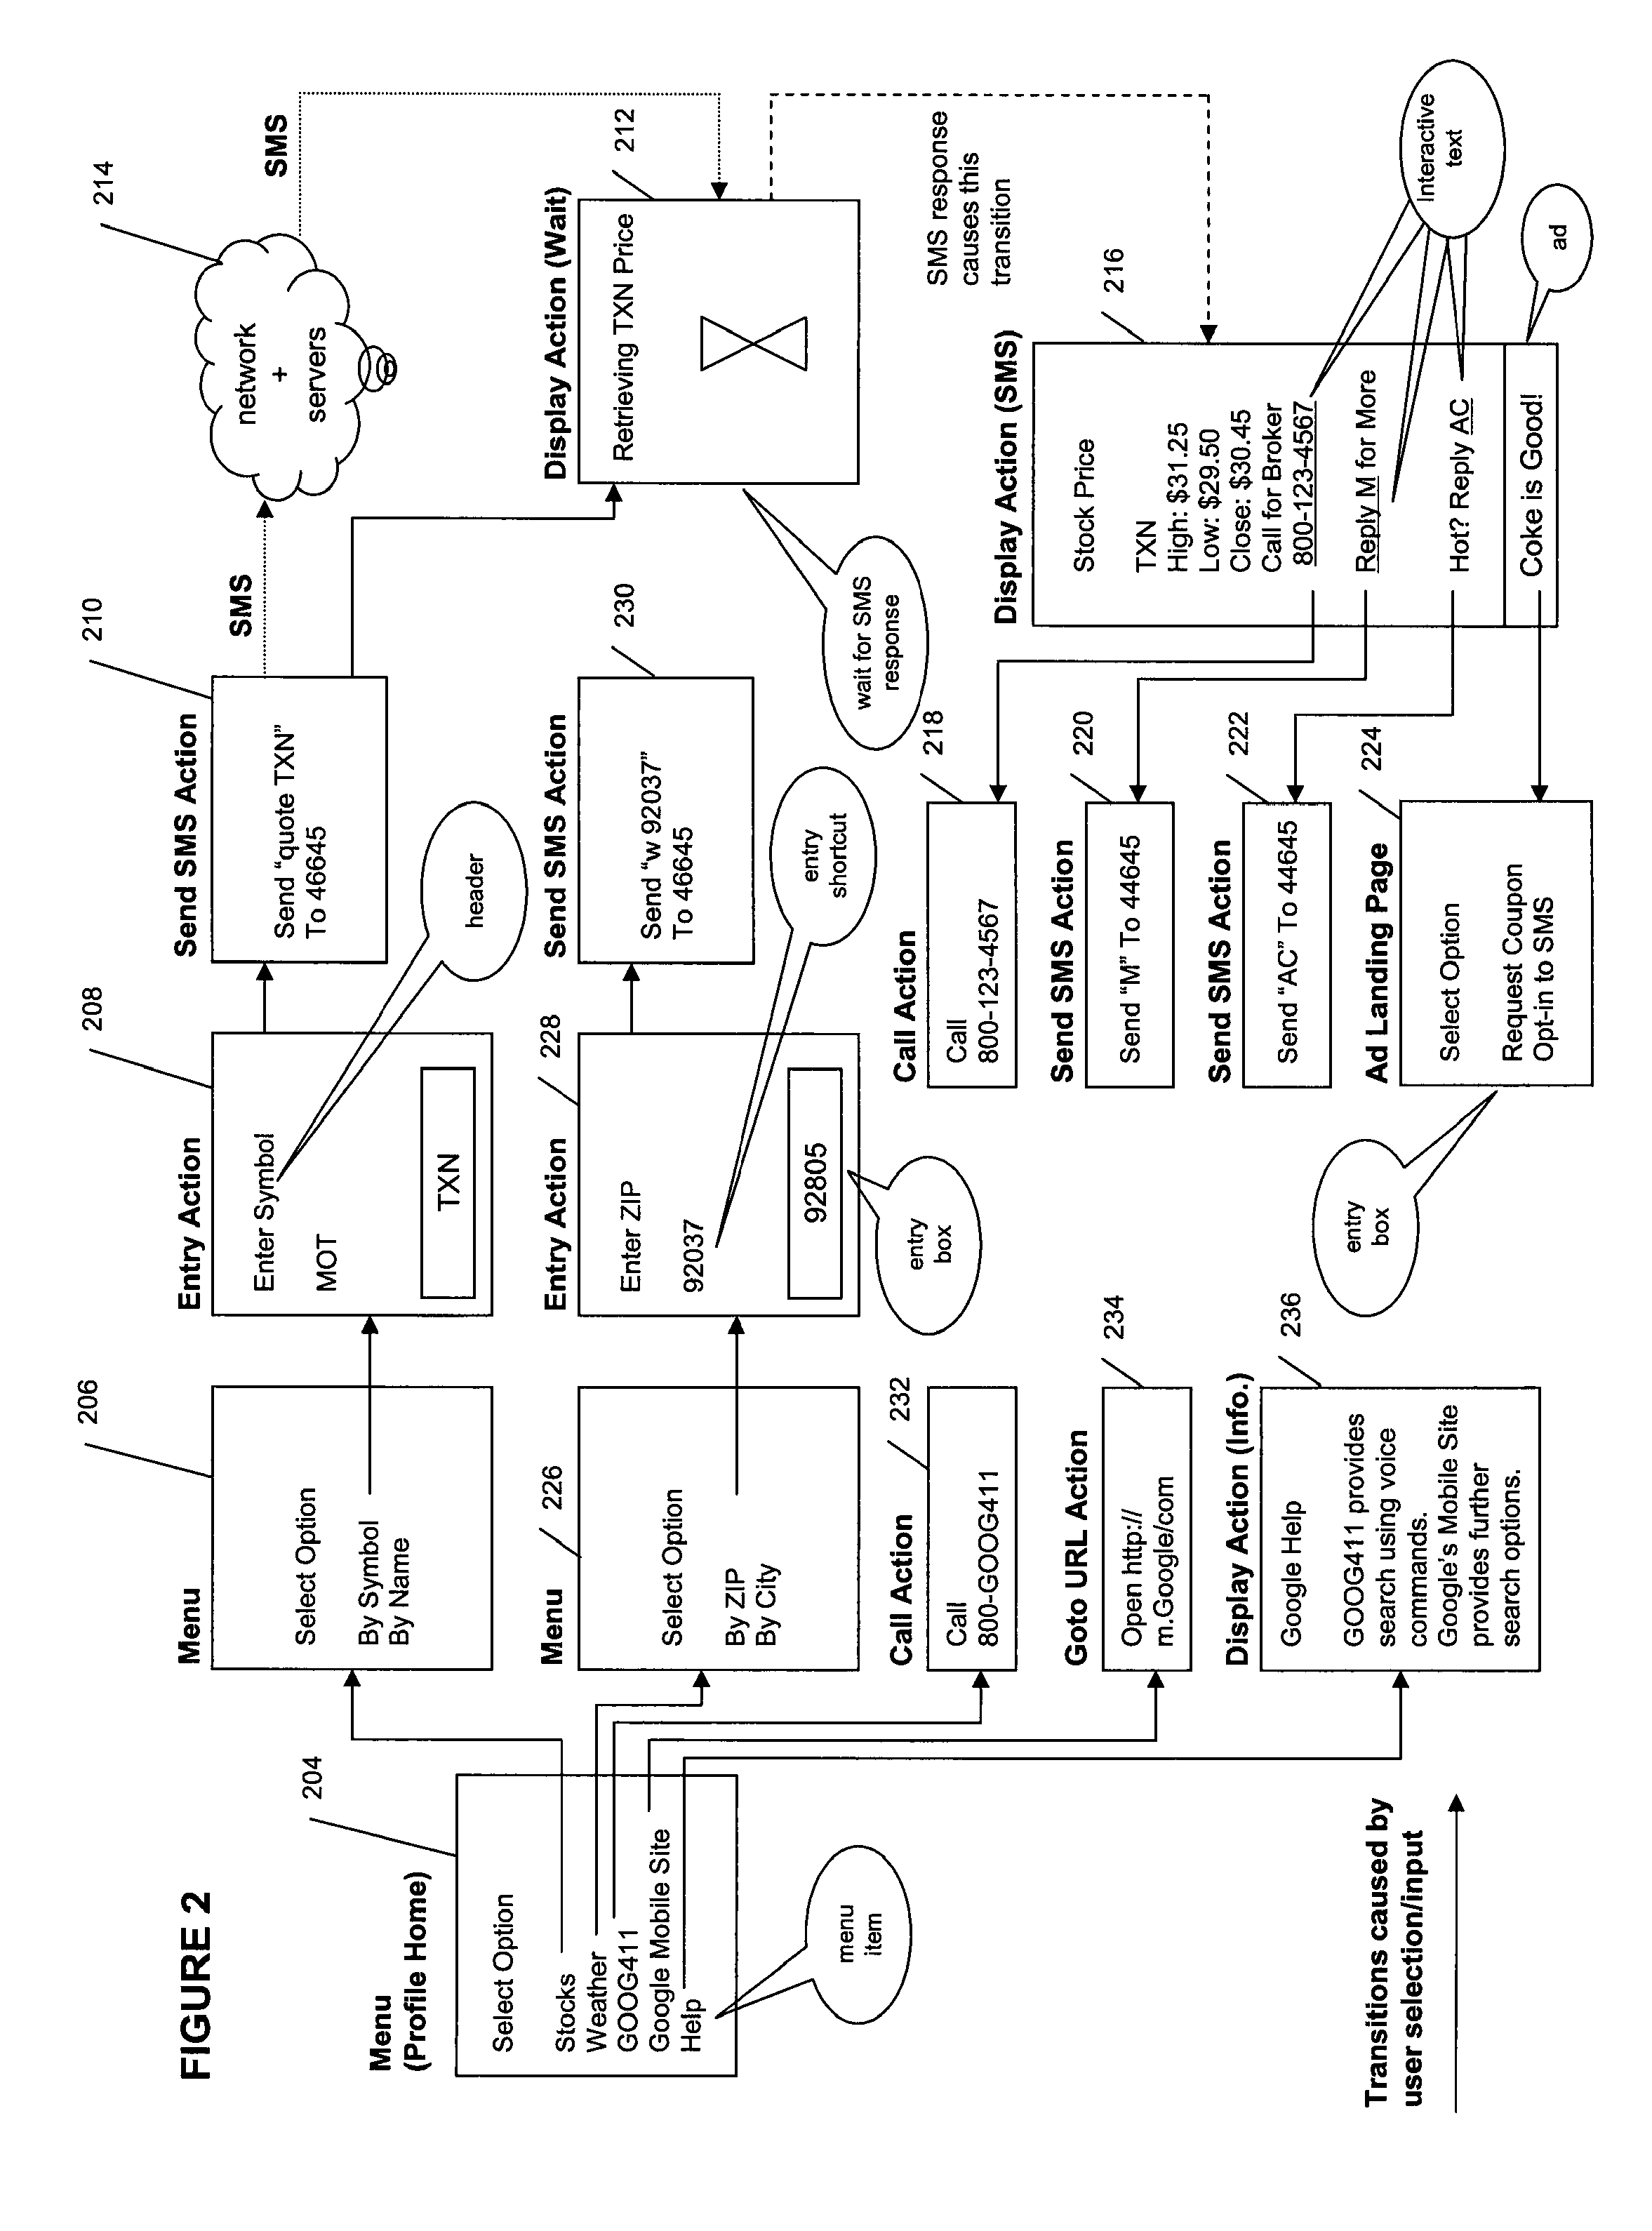 System and method for enhanced communications via small data rate communication systems